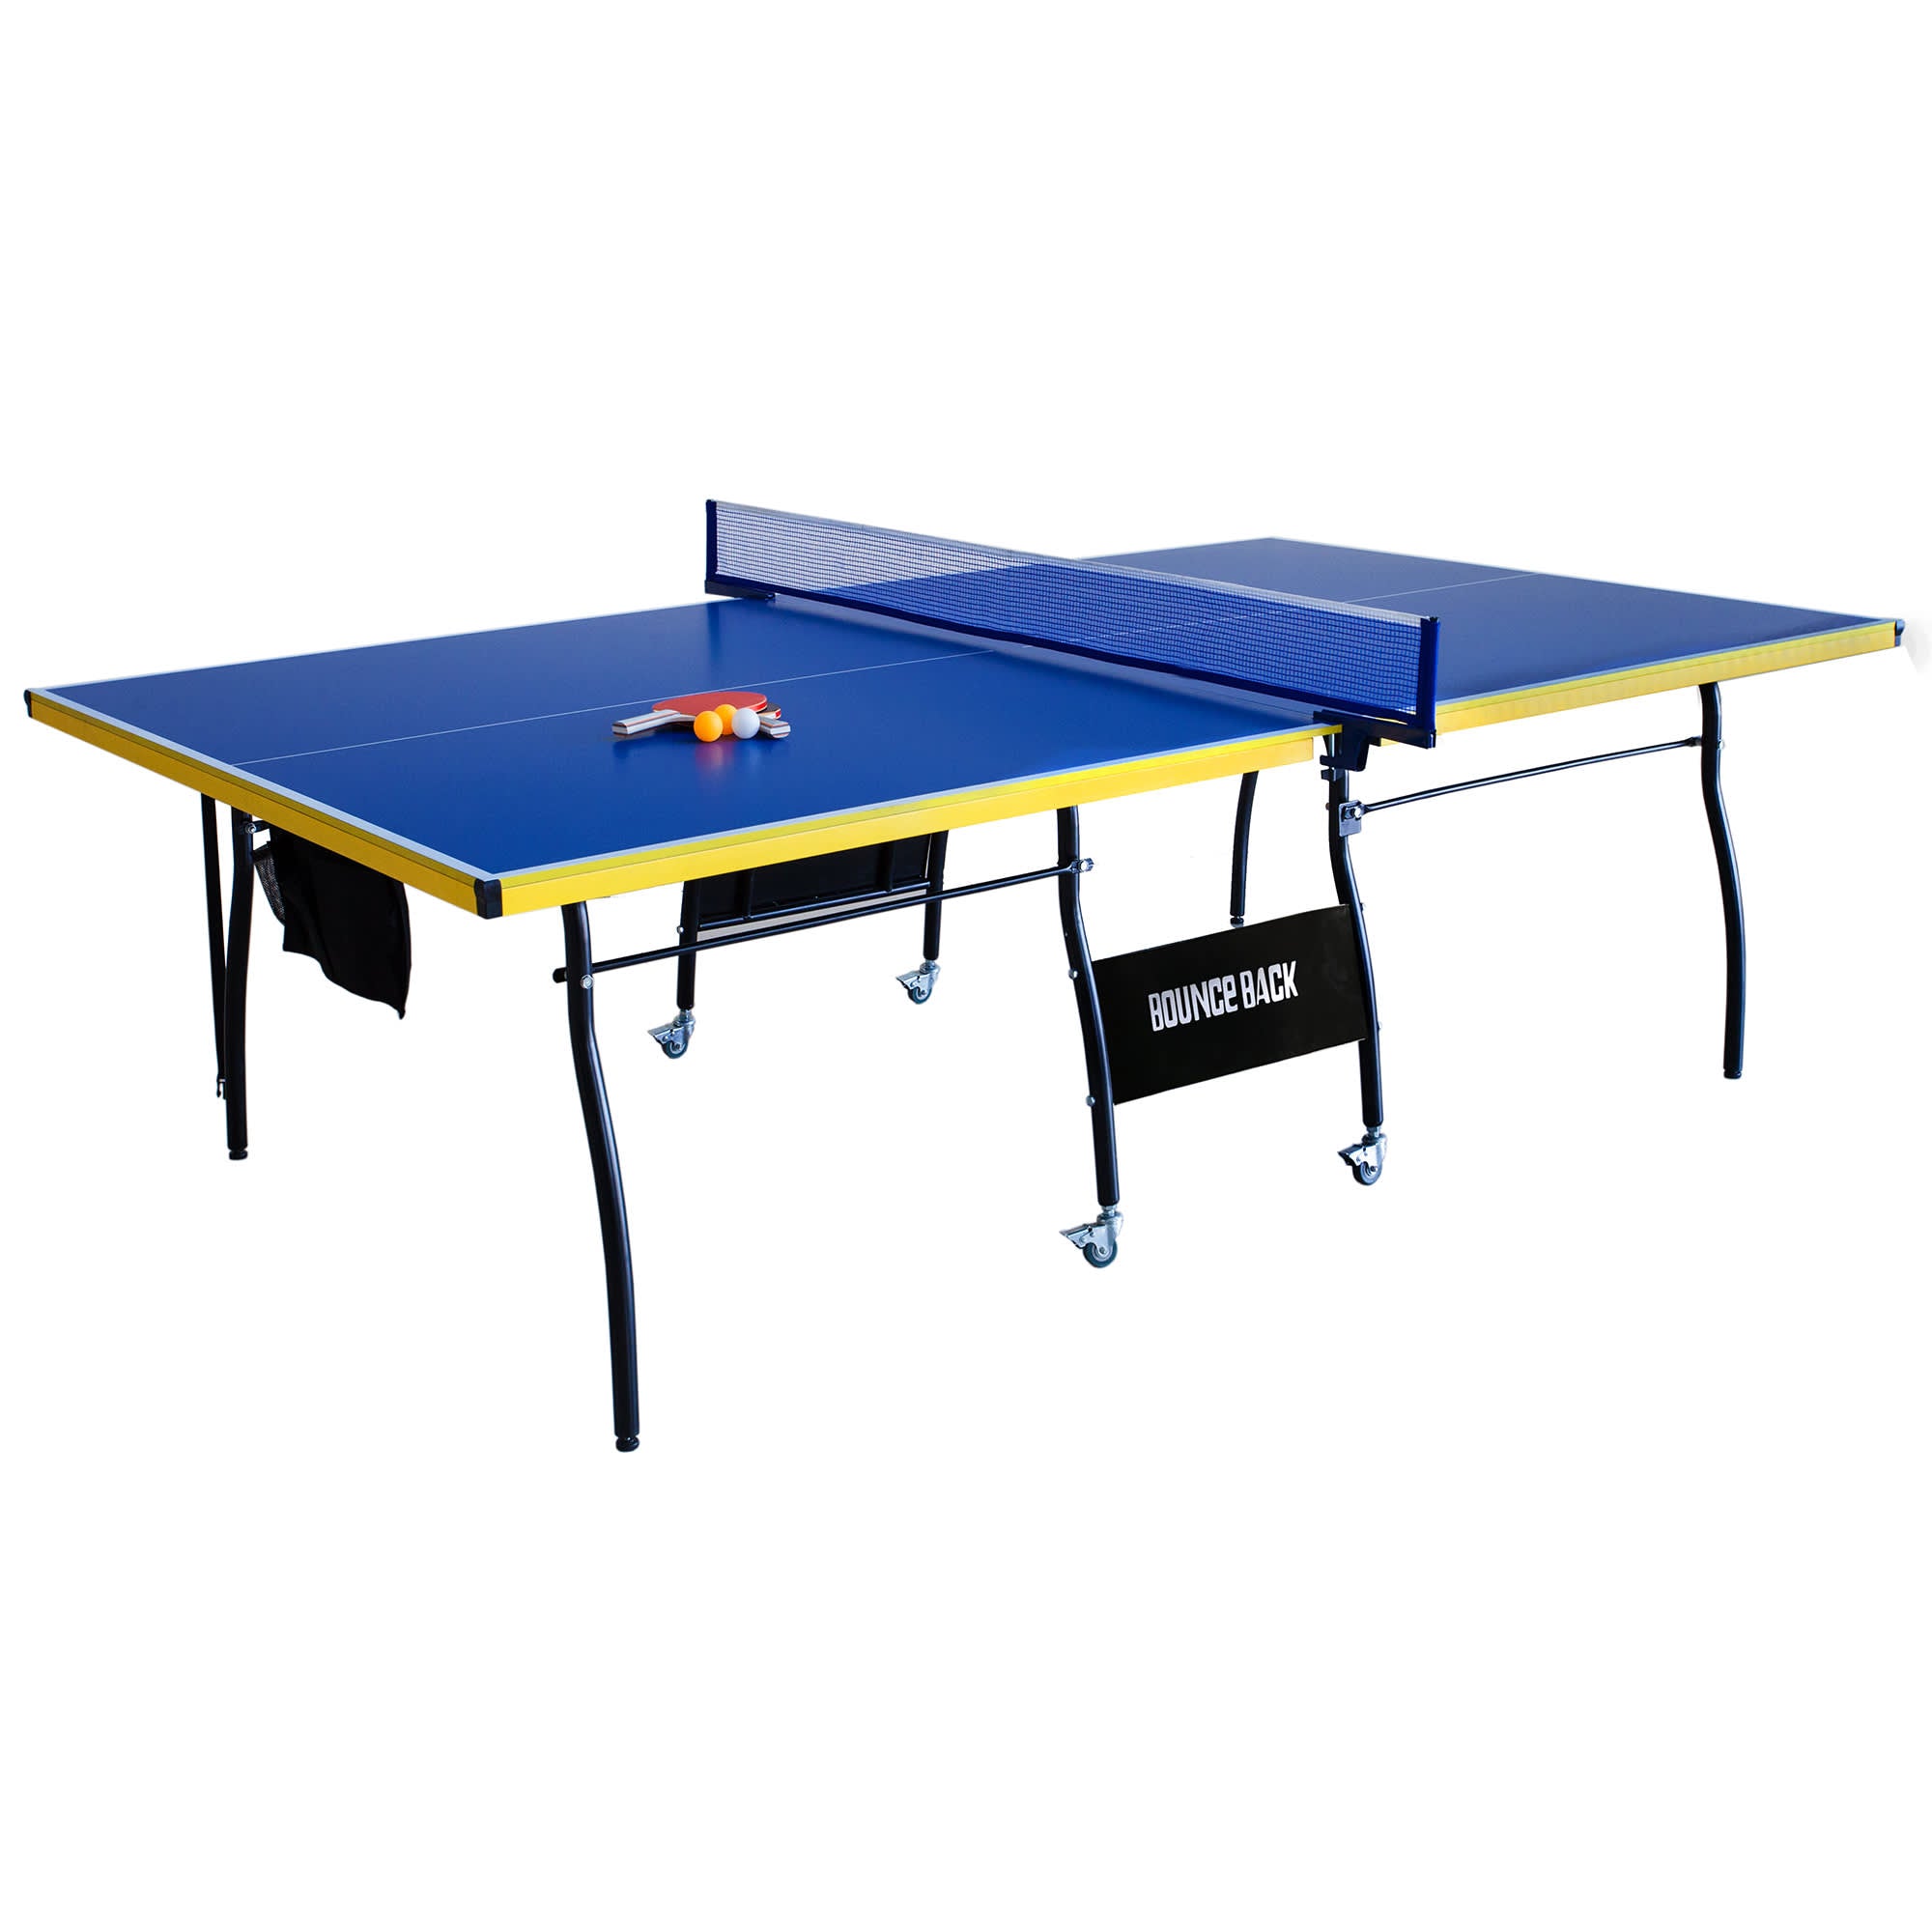 Ping Pong 101: Which Side of The Ping Pong Paddle to Use – branded